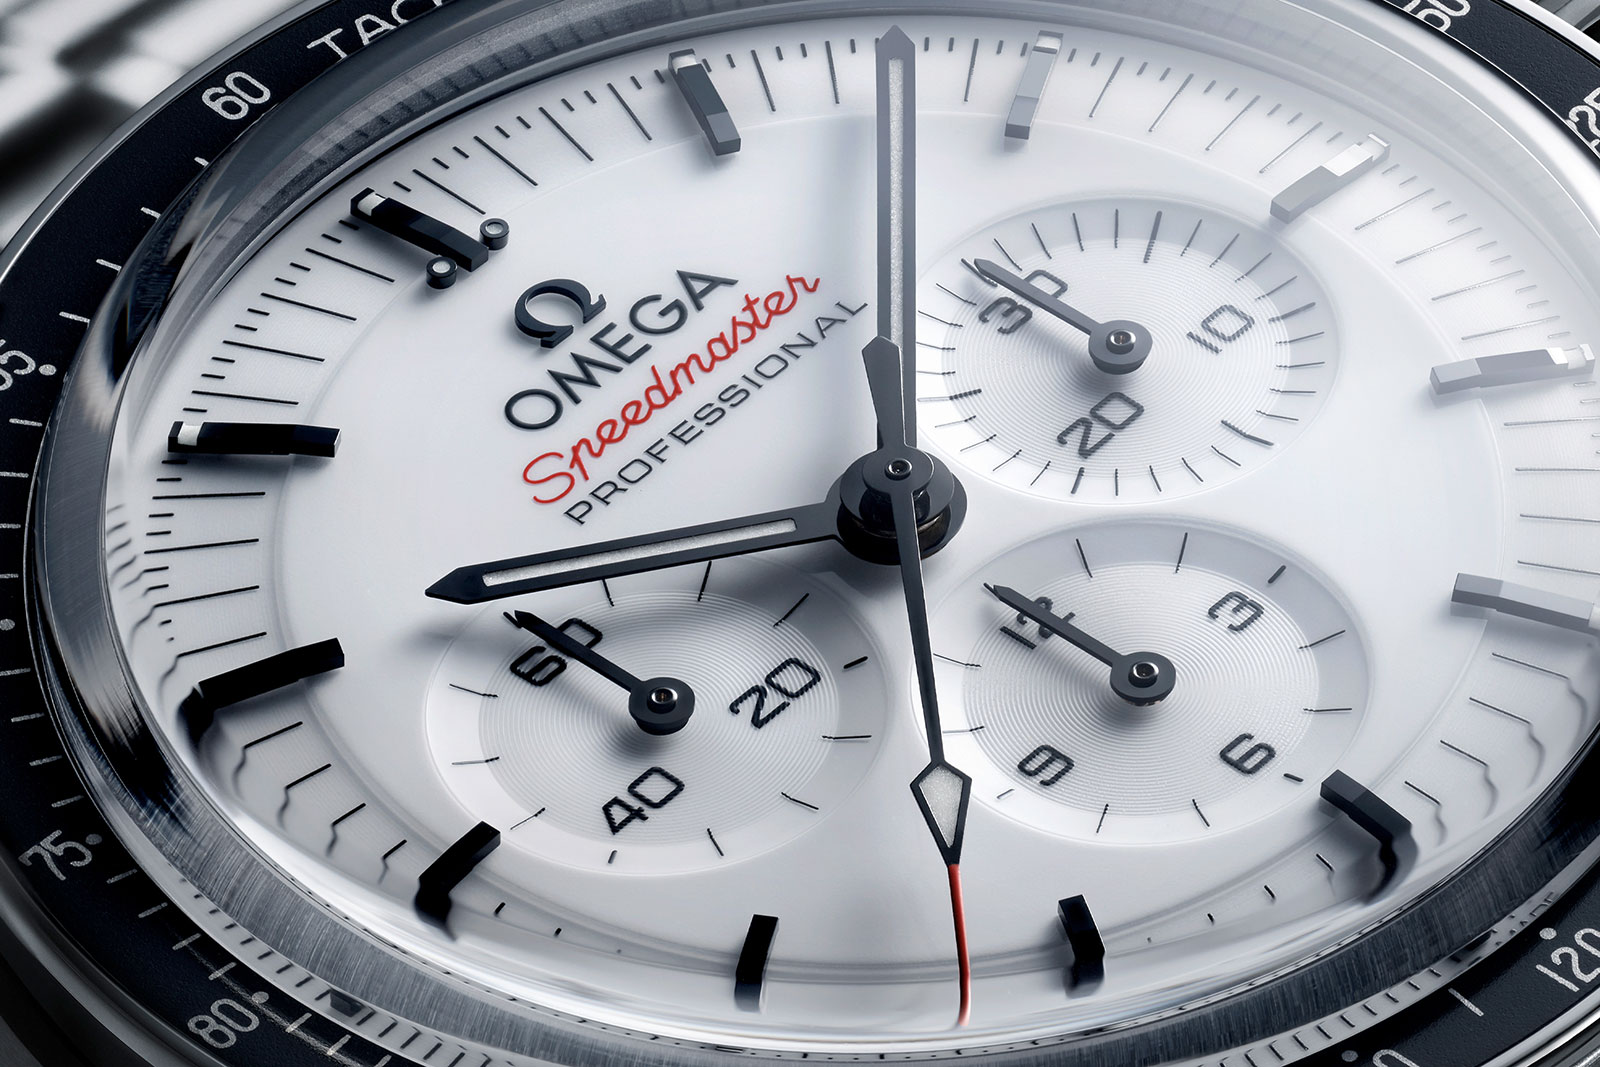 Omega Introduces Speedmaster Moonwatch with a White Lacquer Dial | SJX ...